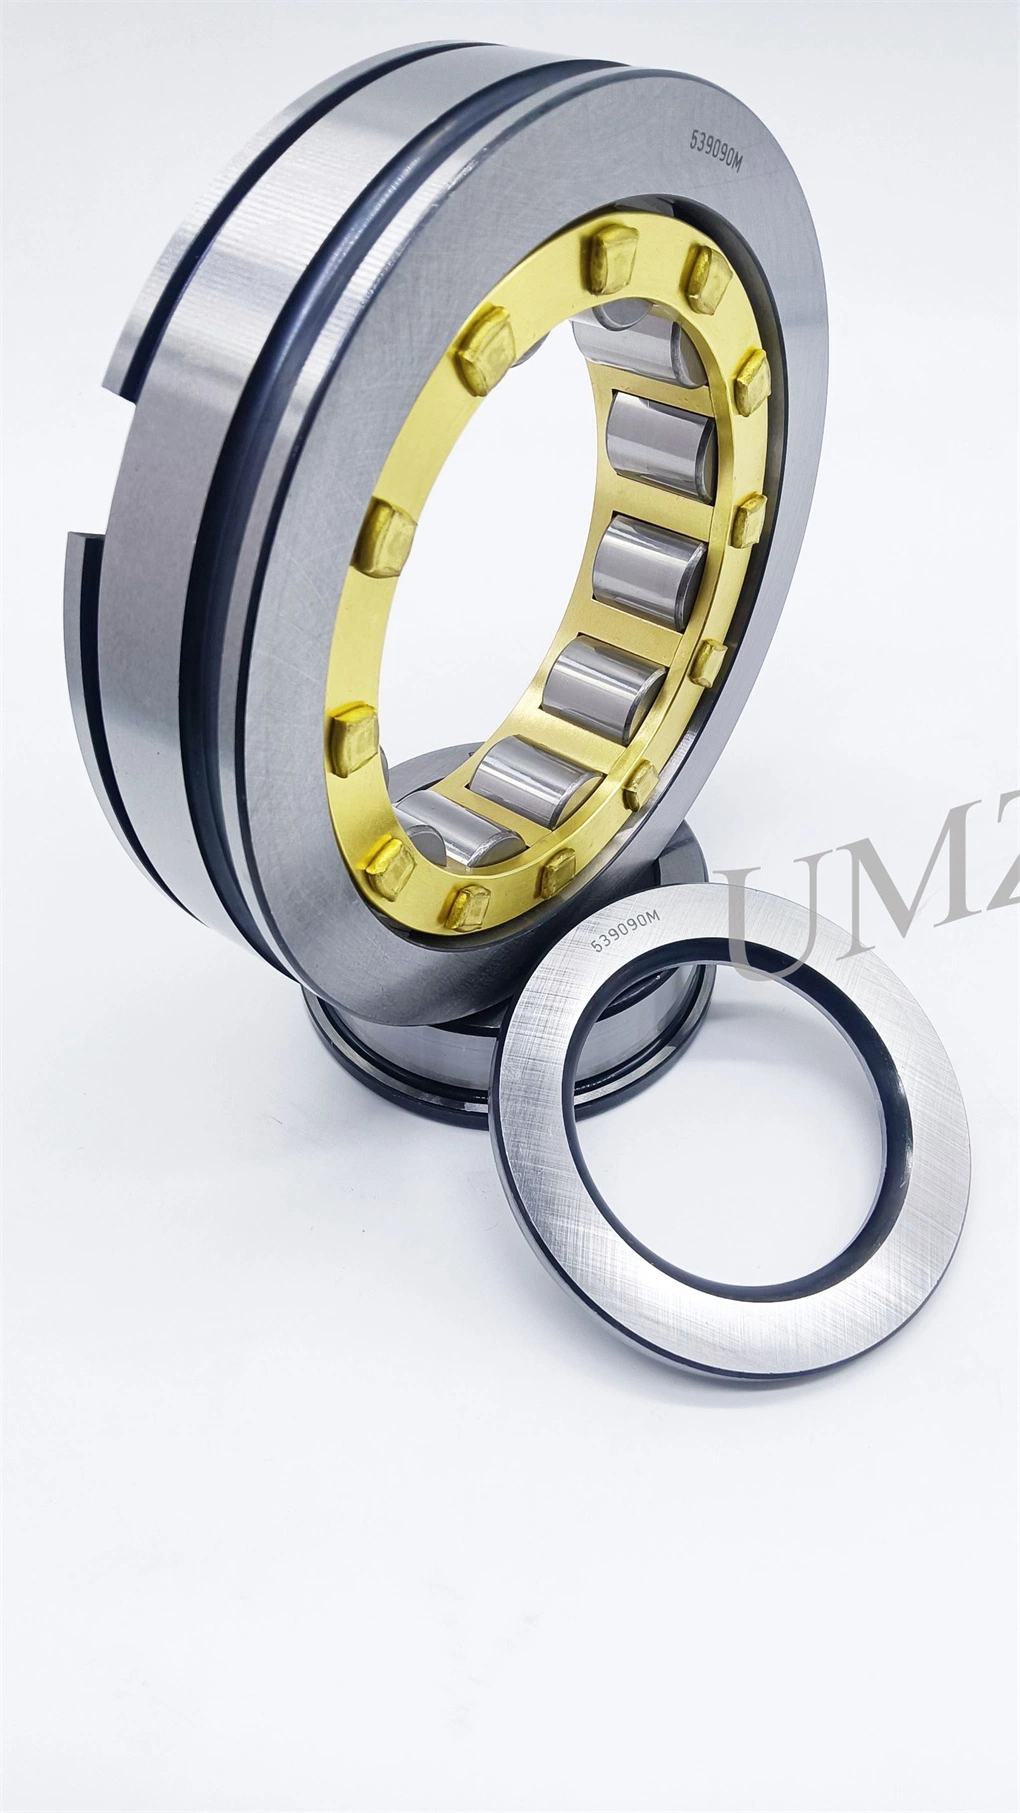 1688 Gearbox Bearing 524625 539090m 512533 Nupk310nr Nup314mn 5666616 524213 Automotive Auto Cylindrical Roller Rolling Bearing Rodamientos Rolamentos